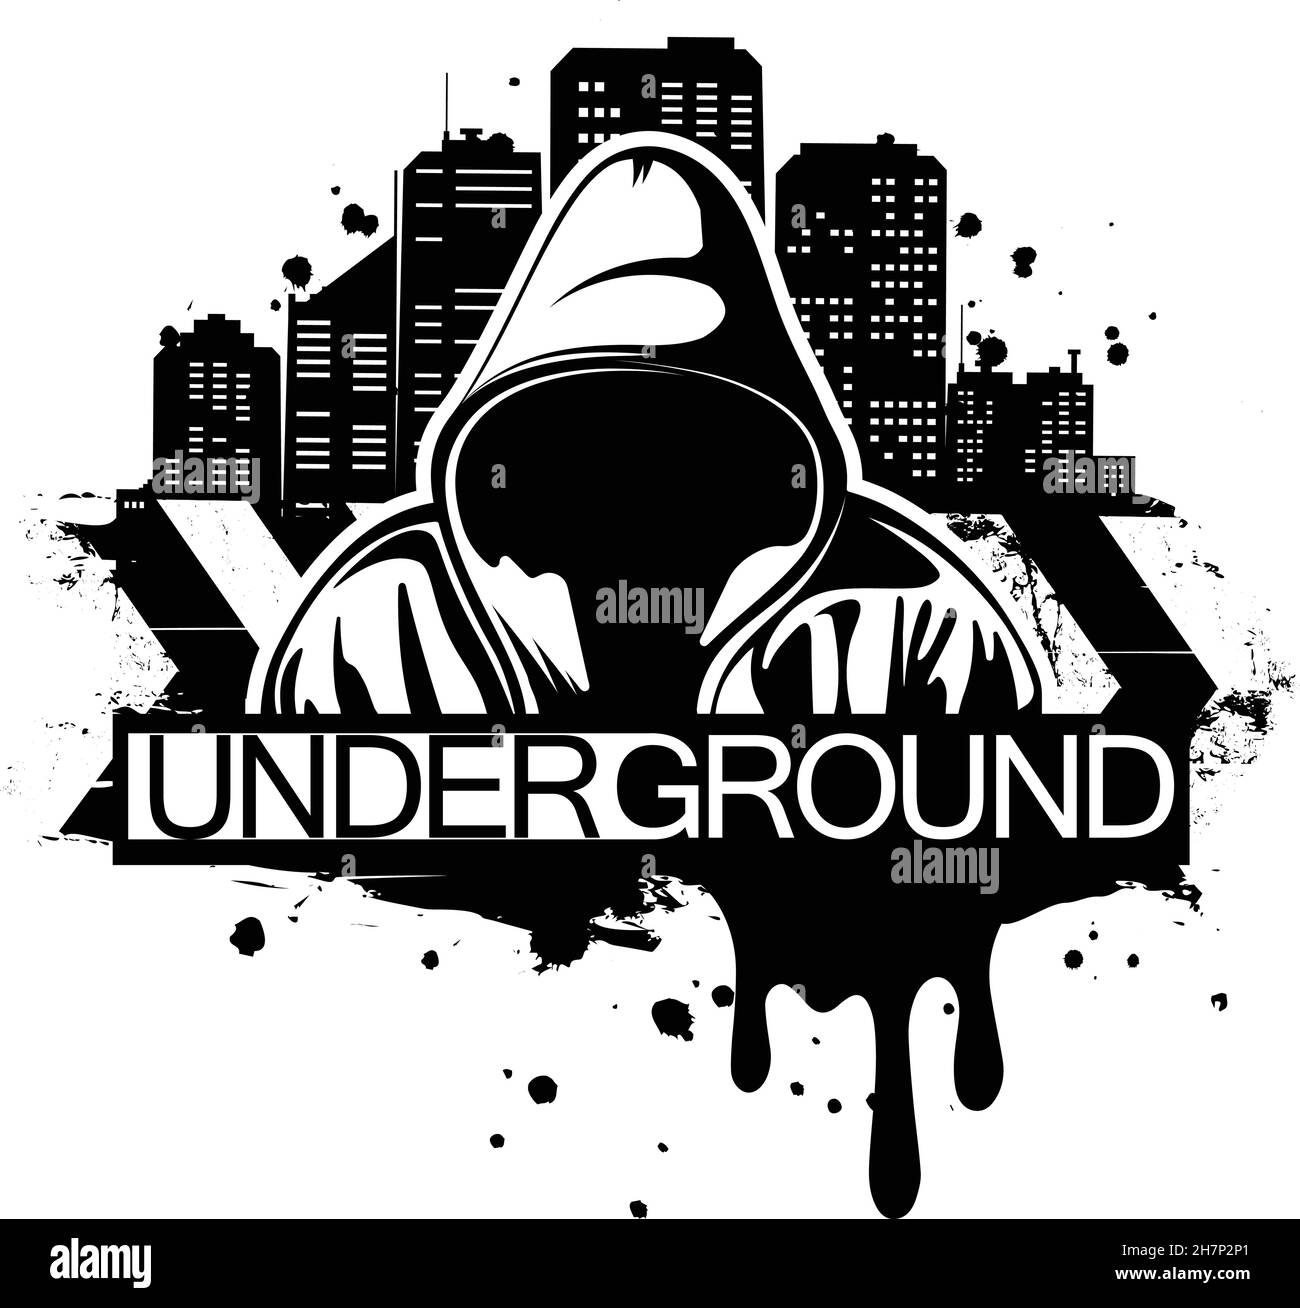 Urban style illustration of man in hoodie behind city silhouette. Street art style. T-shirt print design. Stock Vector